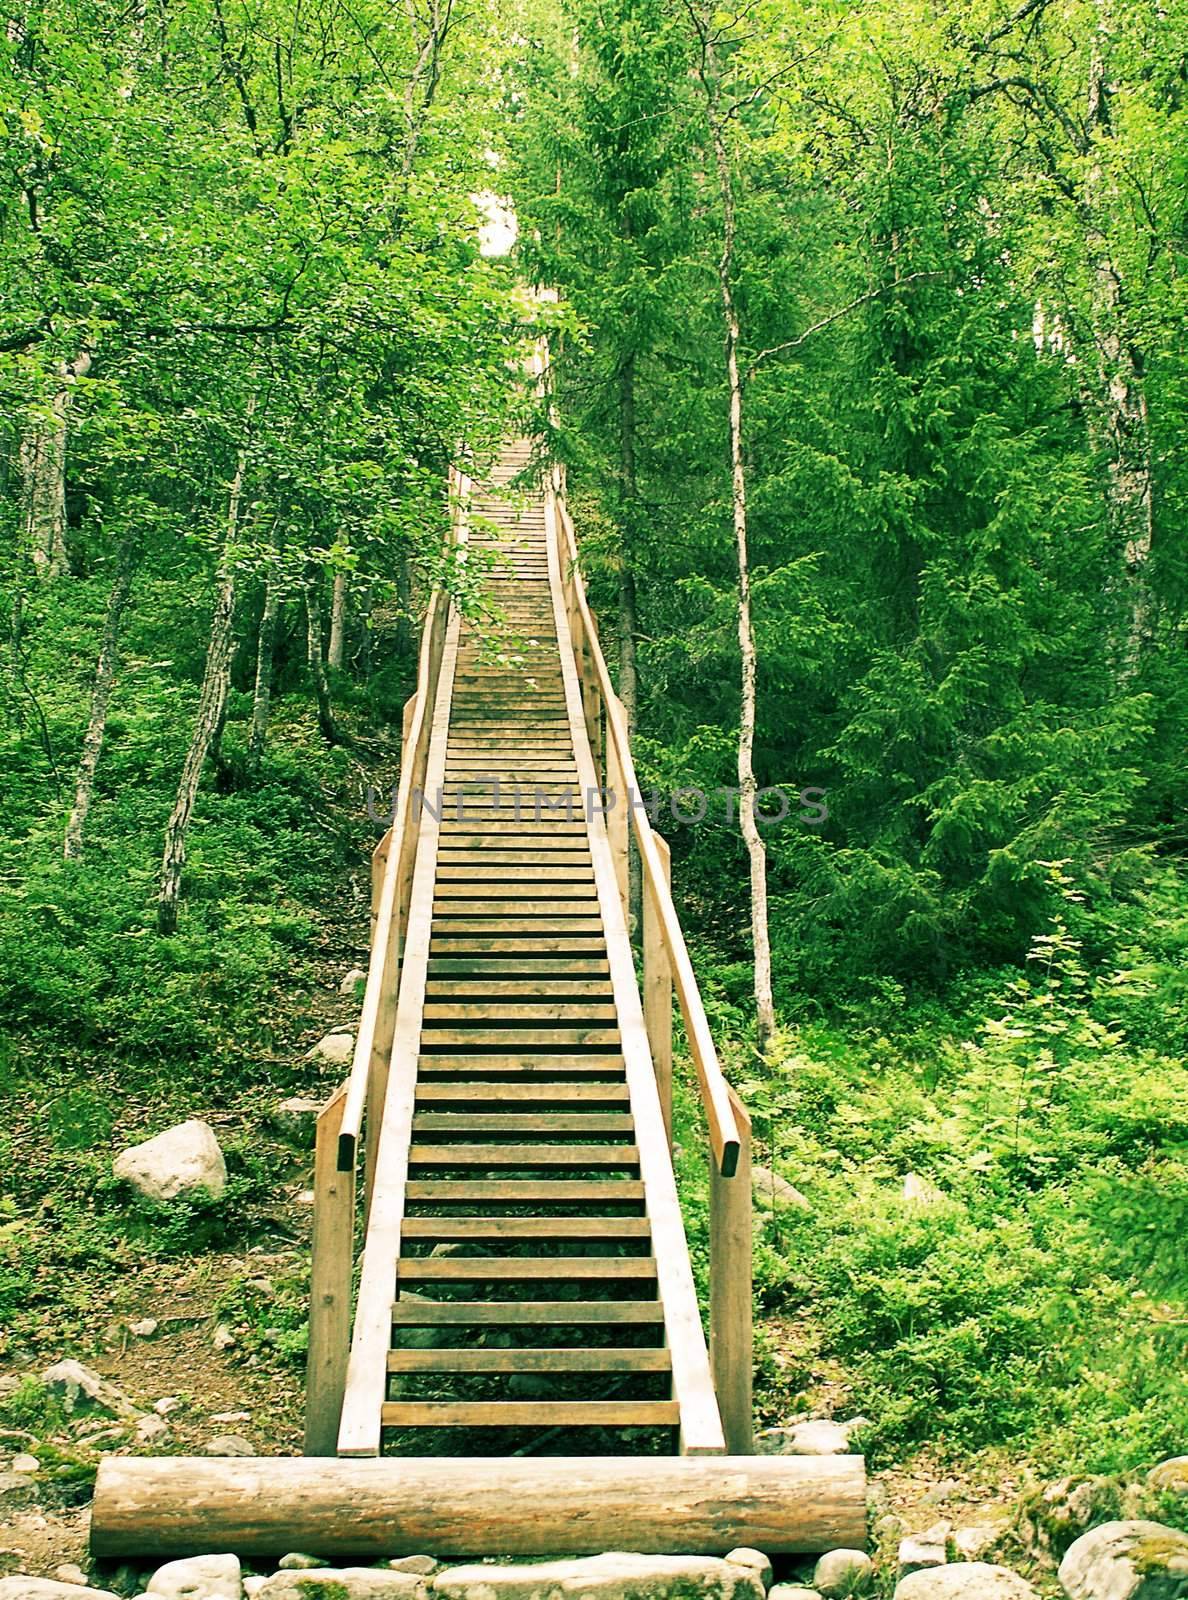 The wooden ladder conducting uphill among trees